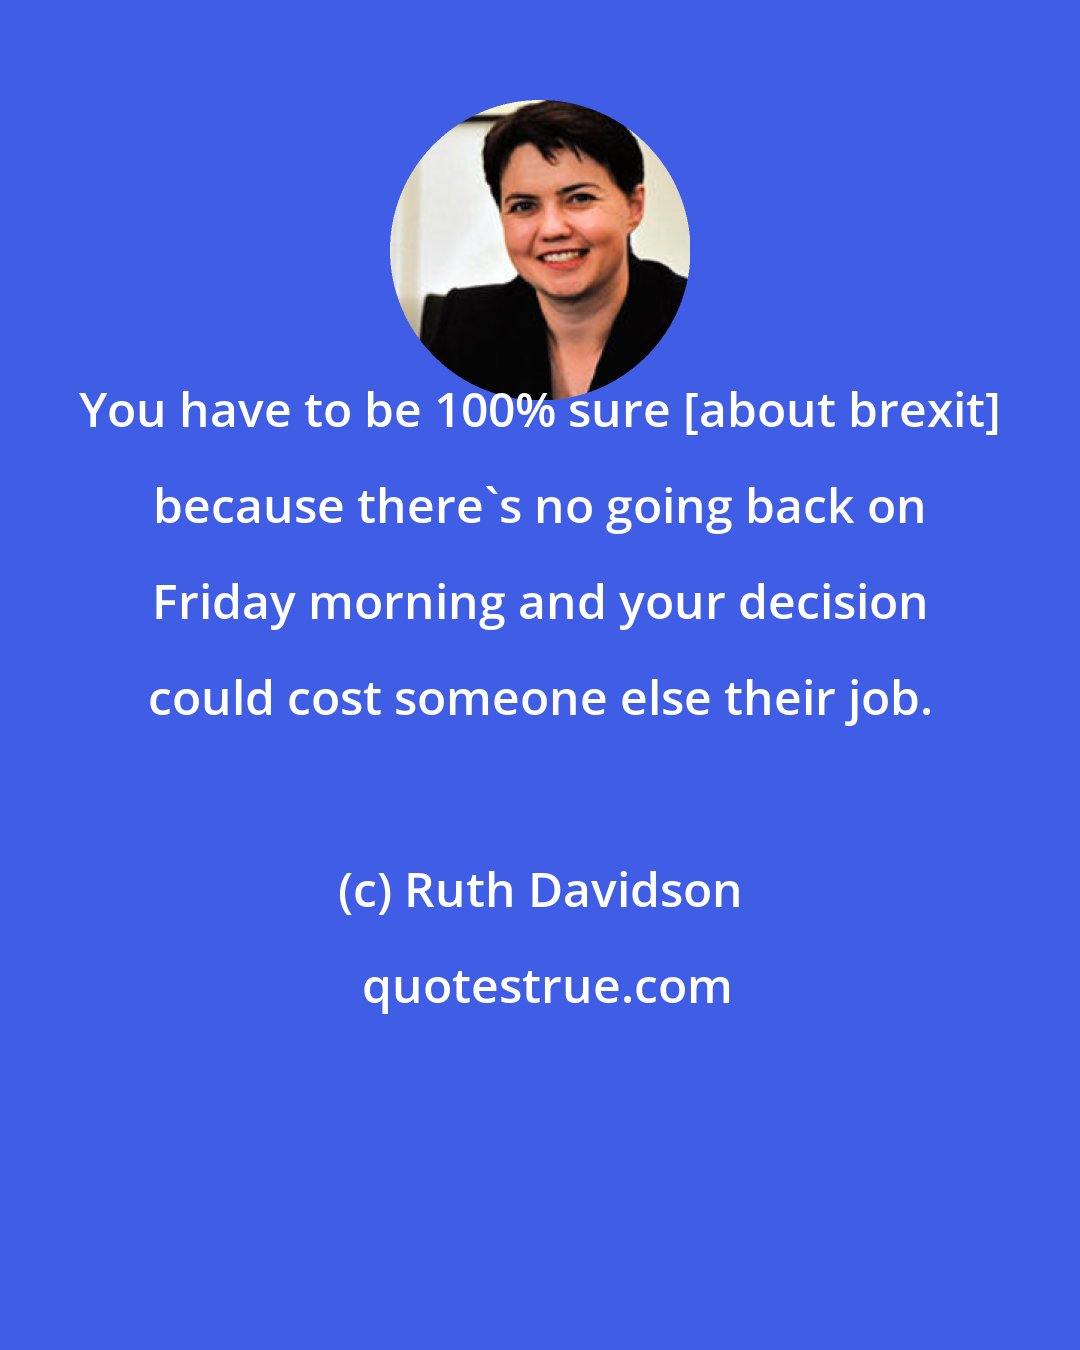 Ruth Davidson: You have to be 100% sure [about brexit] because there's no going back on Friday morning and your decision could cost someone else their job.